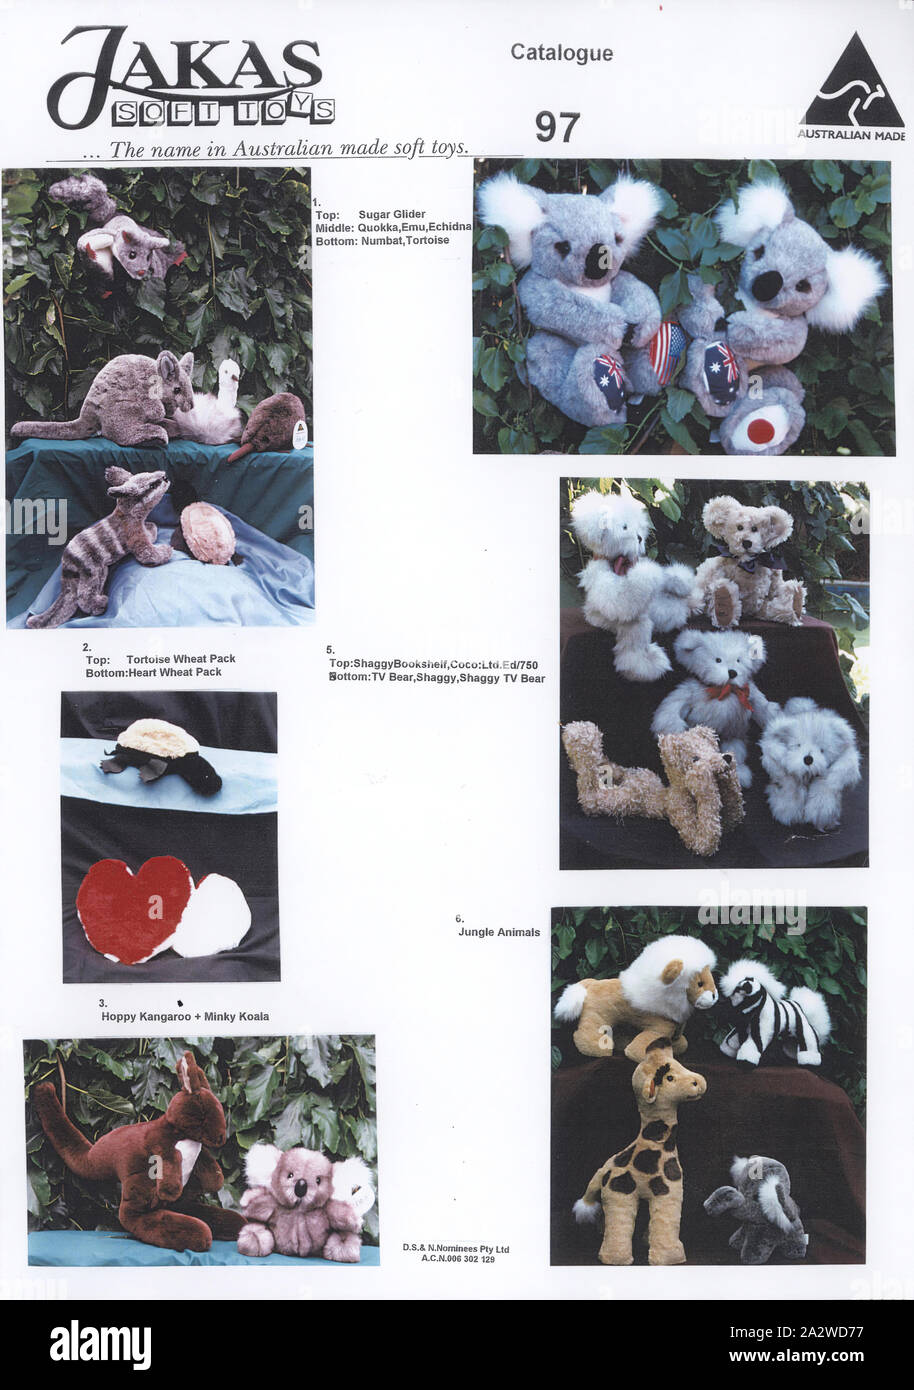 Advertising Flyer - Jakas Soft Toys, Melbourne, 1997, A single page advertising flyer showing a range of animal soft toys and wheat packs. Images feature Australian animal soft toys, jungle animal soft toys, teddy bears and wheat packs in the shape of a heart and toy tortoise. Jakas Soft Toys was a Melbourne-based company which designed and manufactured genuine high quality soft toys from 1956. Their range included teddy bears, golliwogs Stock Photo